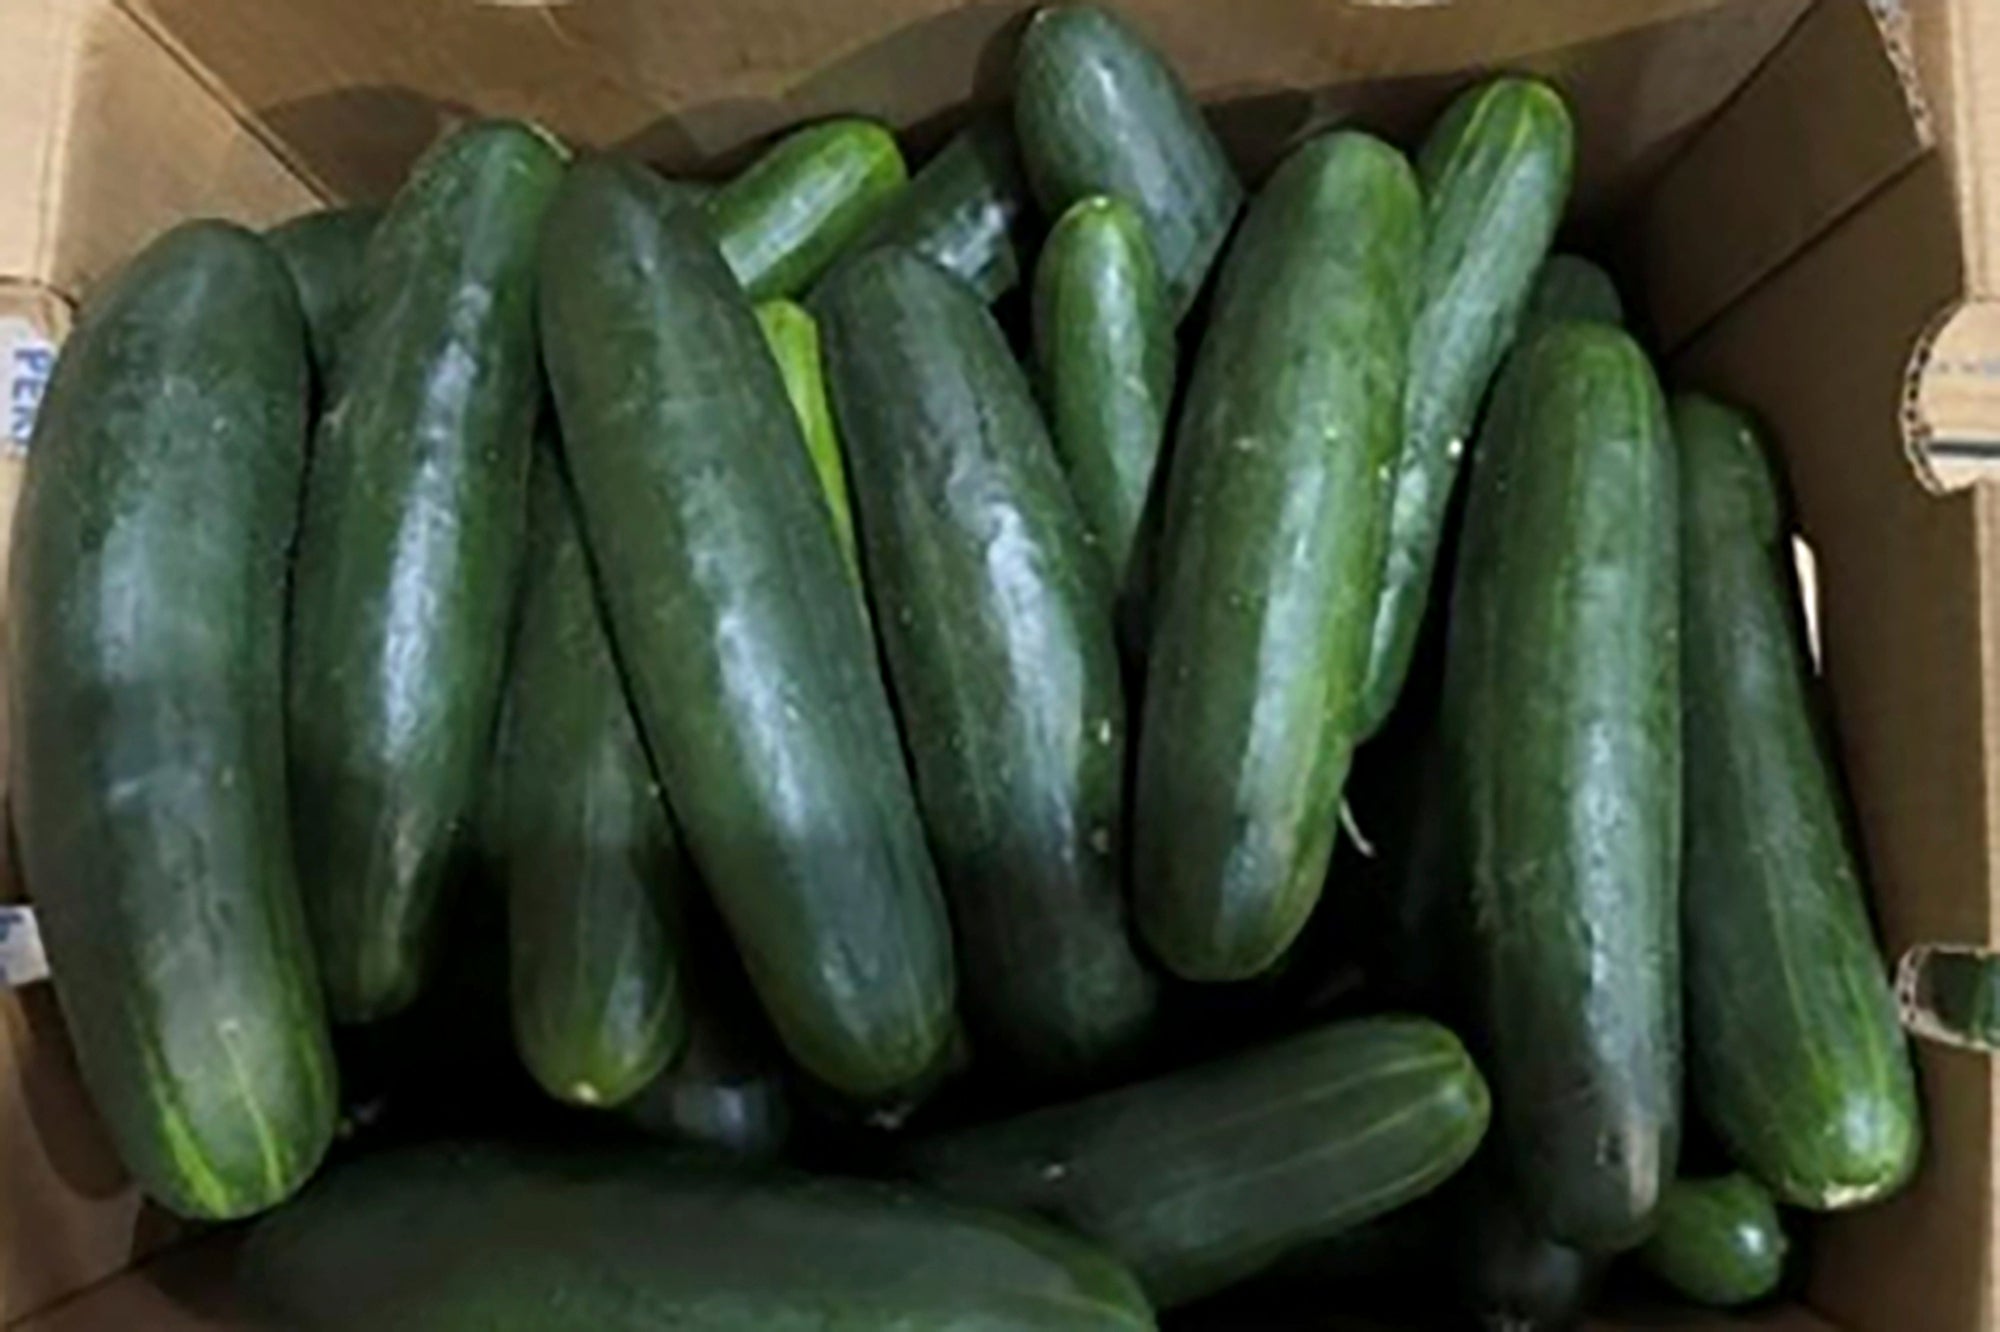 Cucumbers in Florida recalled for salmonella